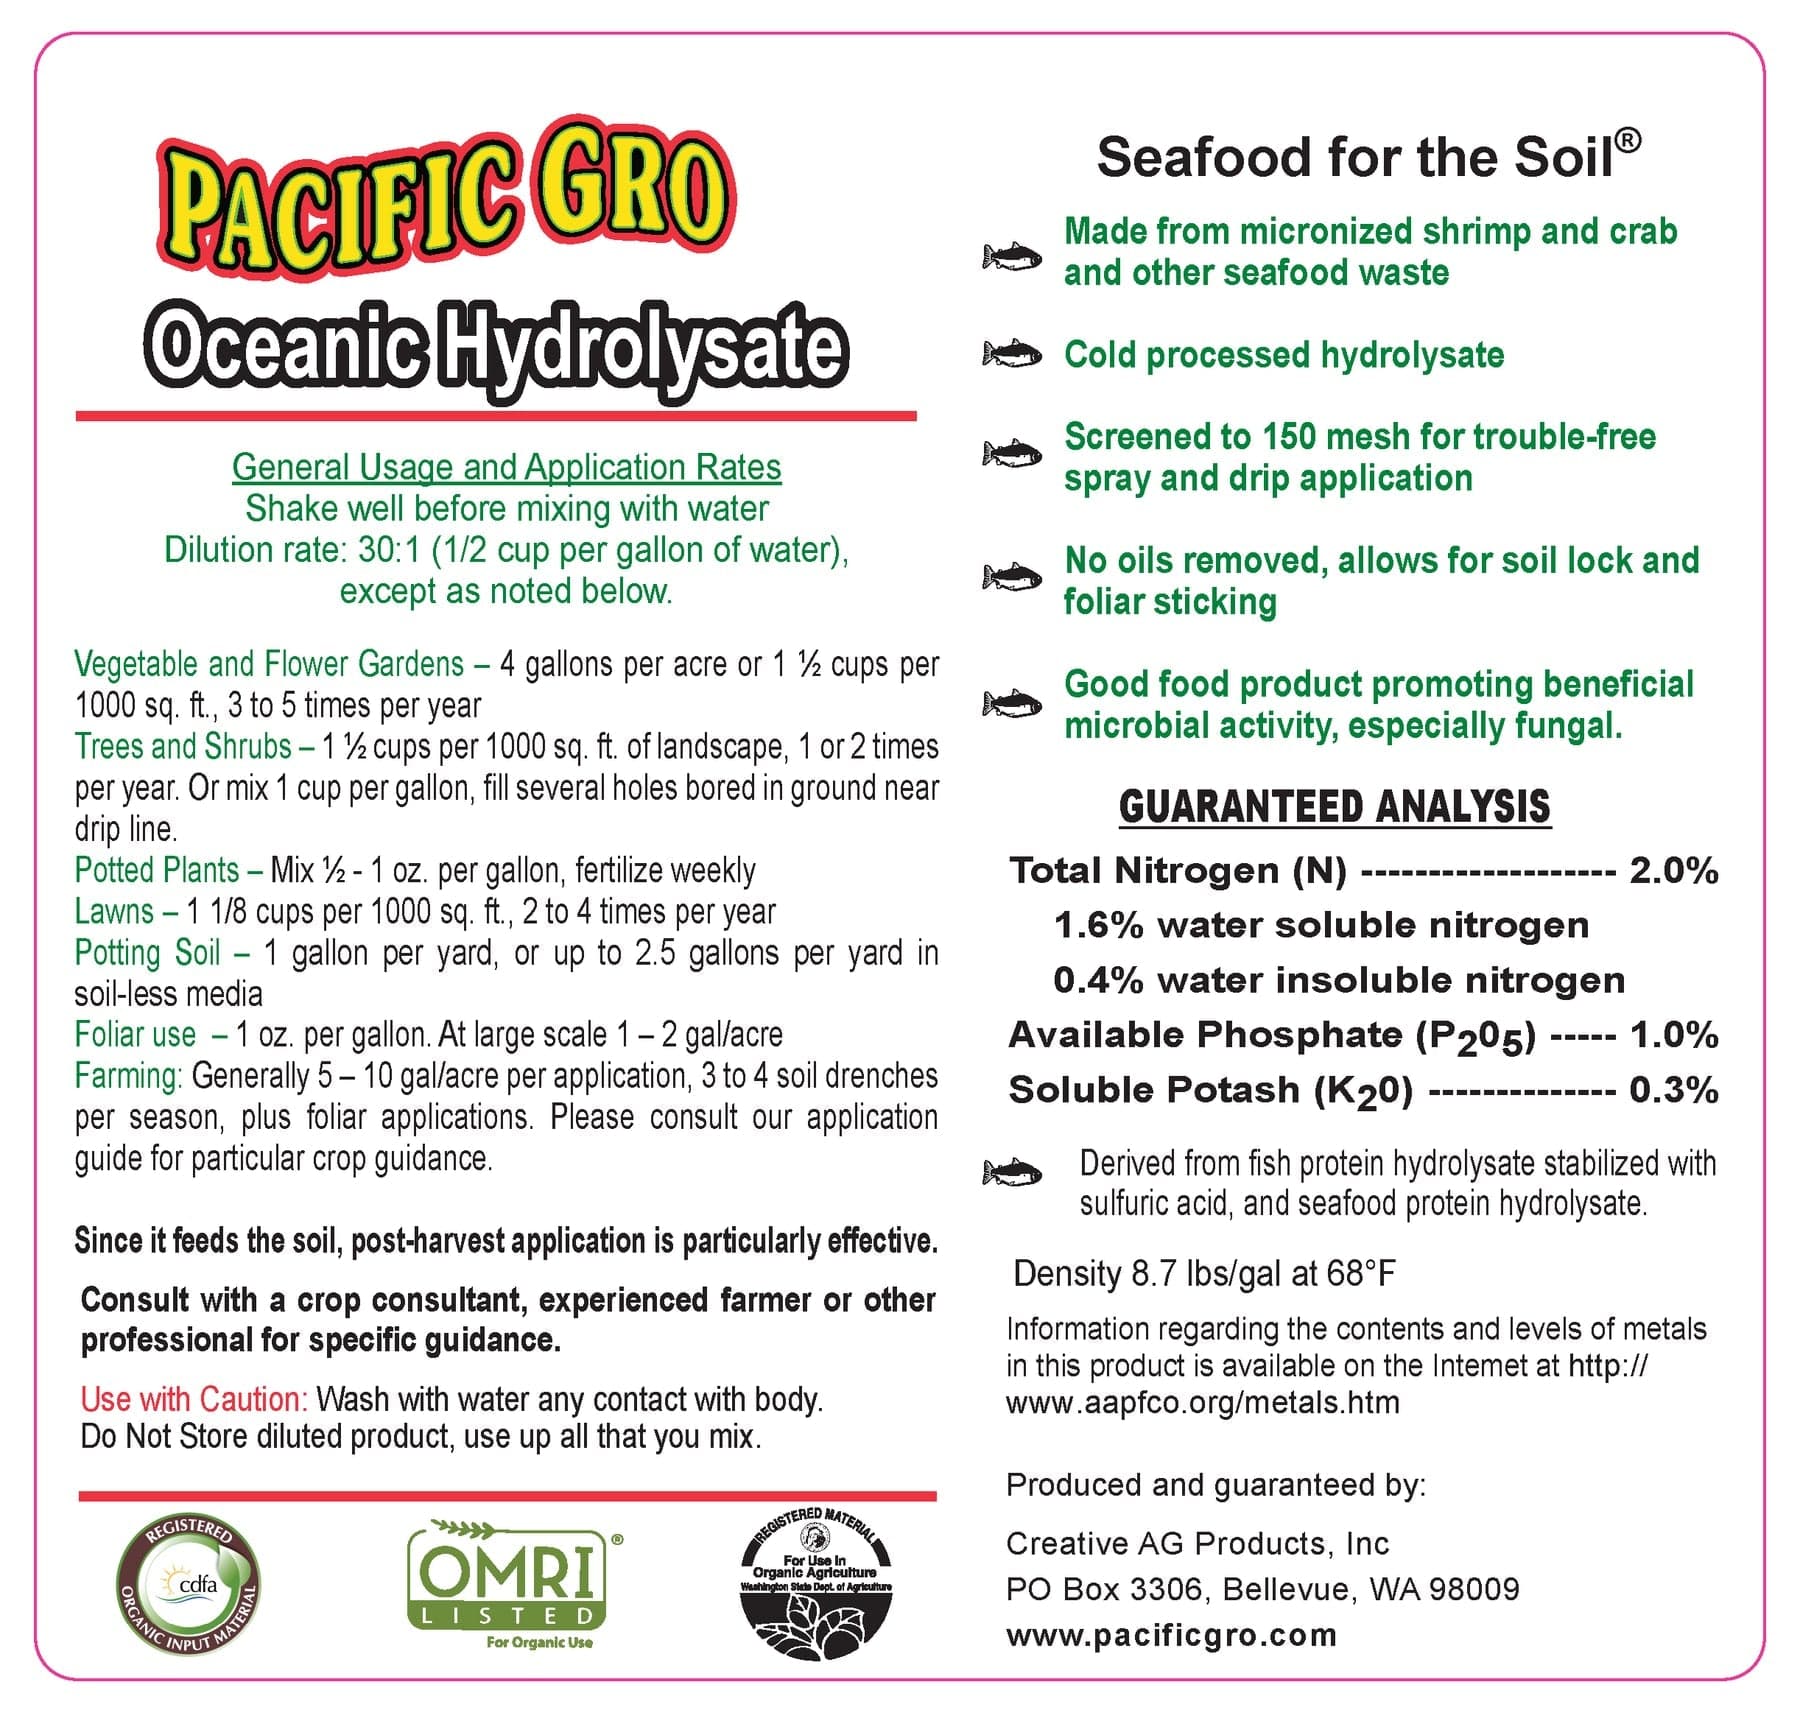 Pacific Gro Pacific Gro Oceanic Hydrolysate 2-1-0.3 with Crab and Shrimp